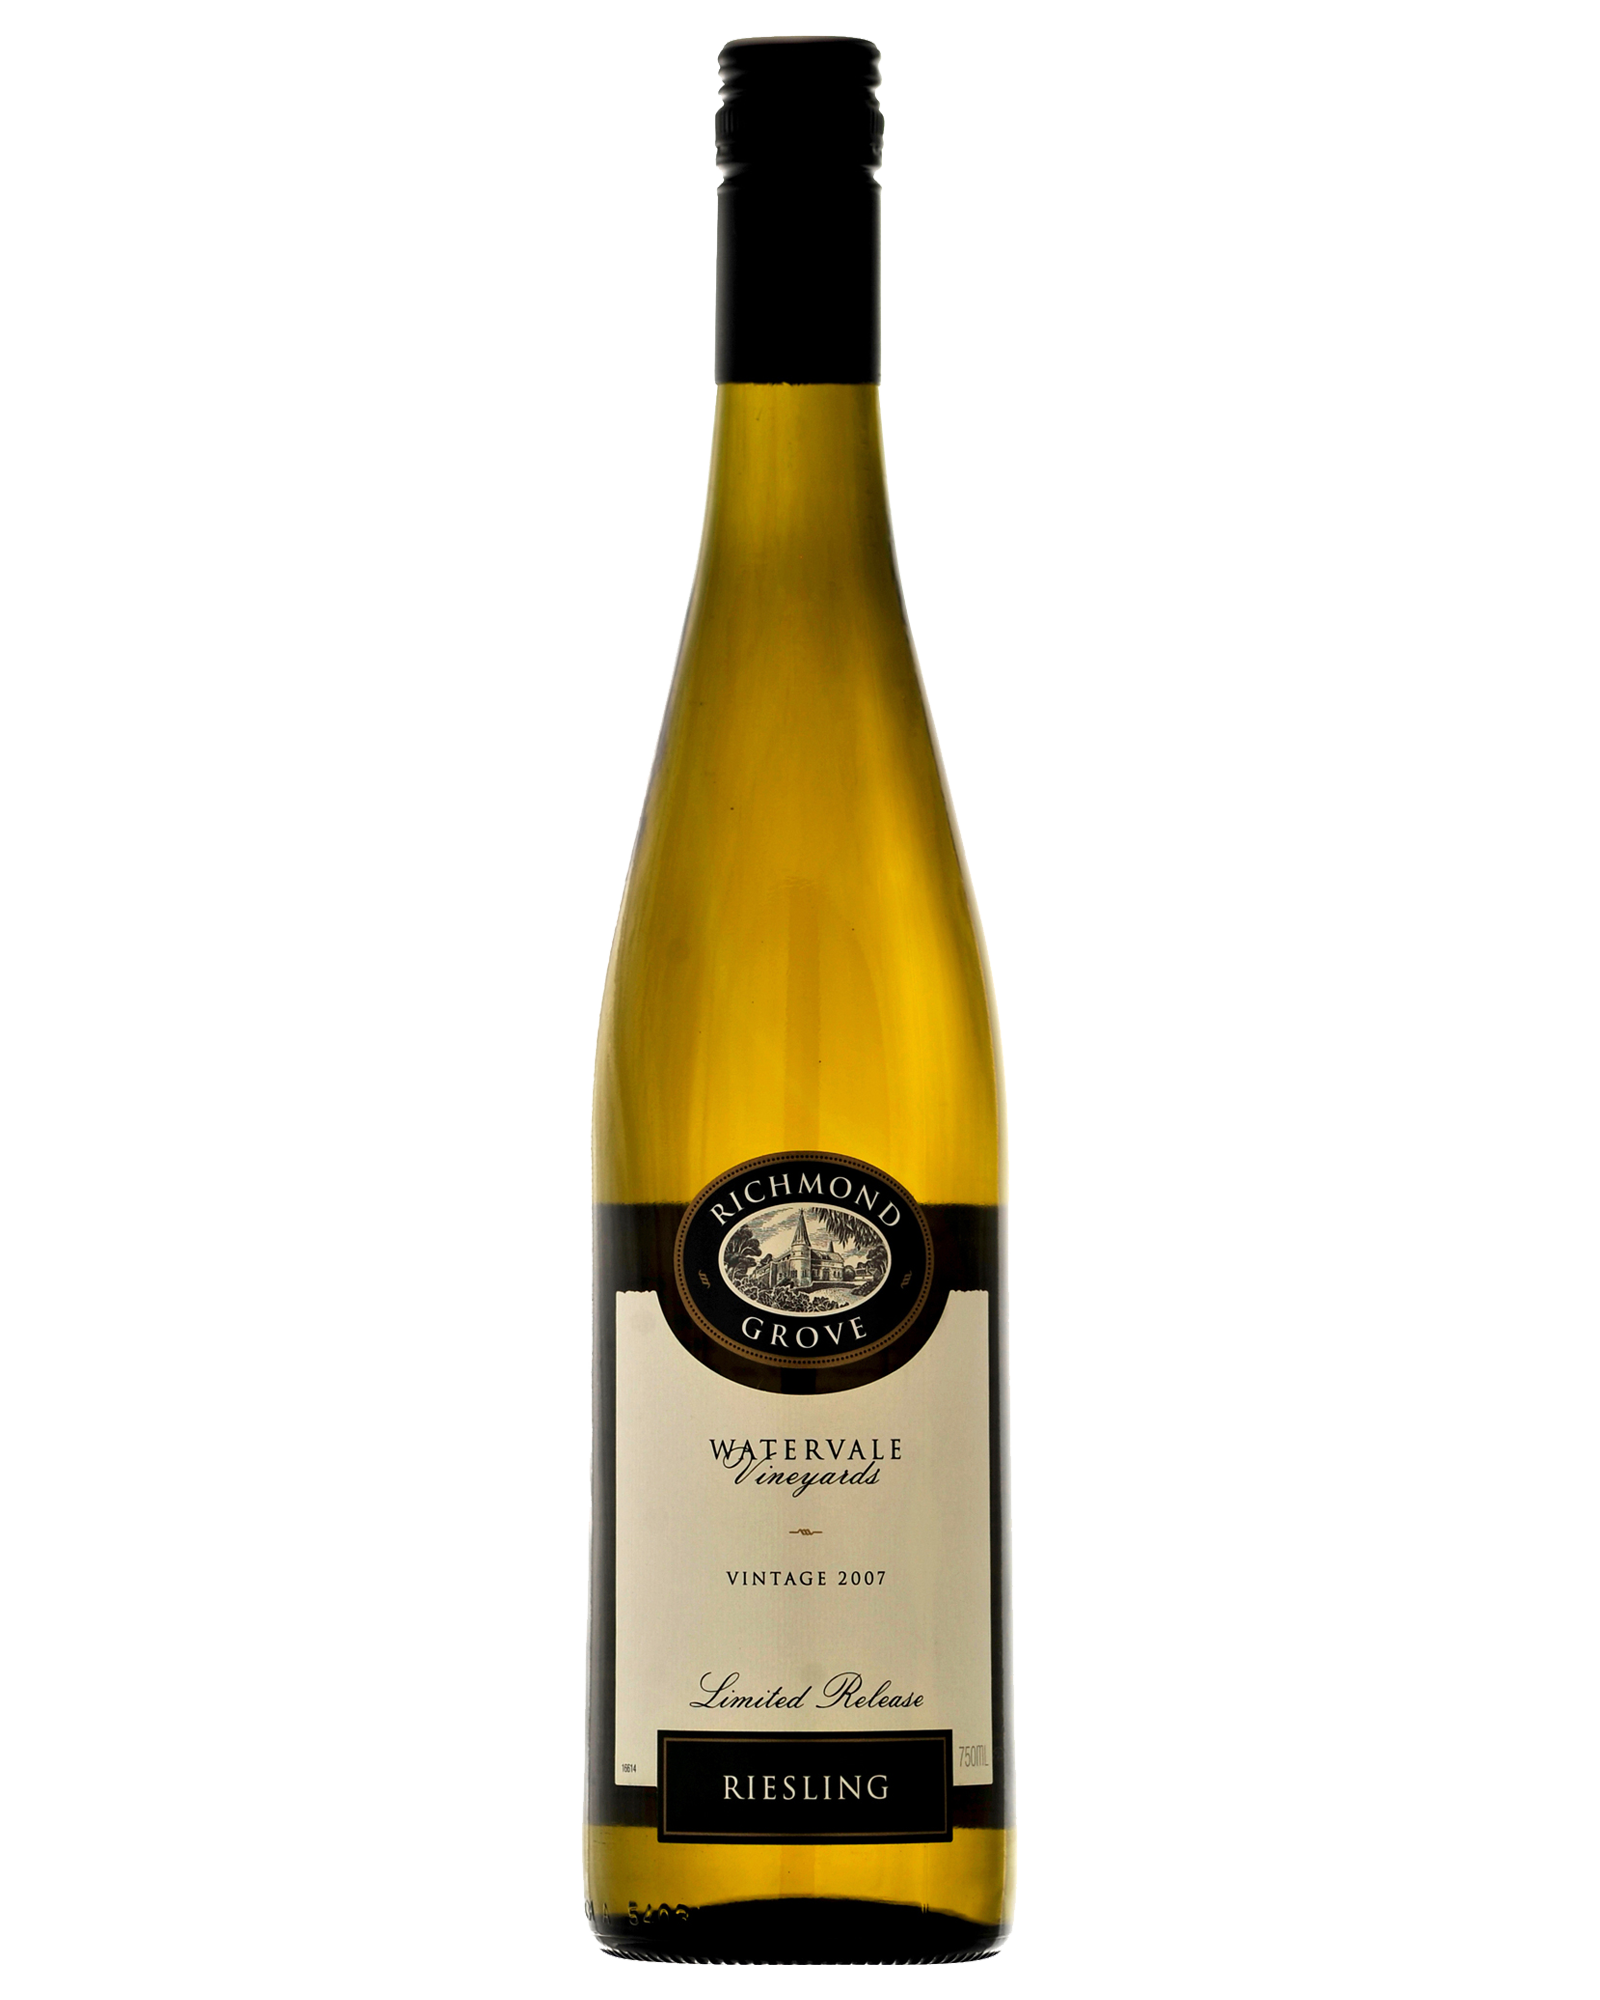 Richmond Grove Limited Release Riesling 2007